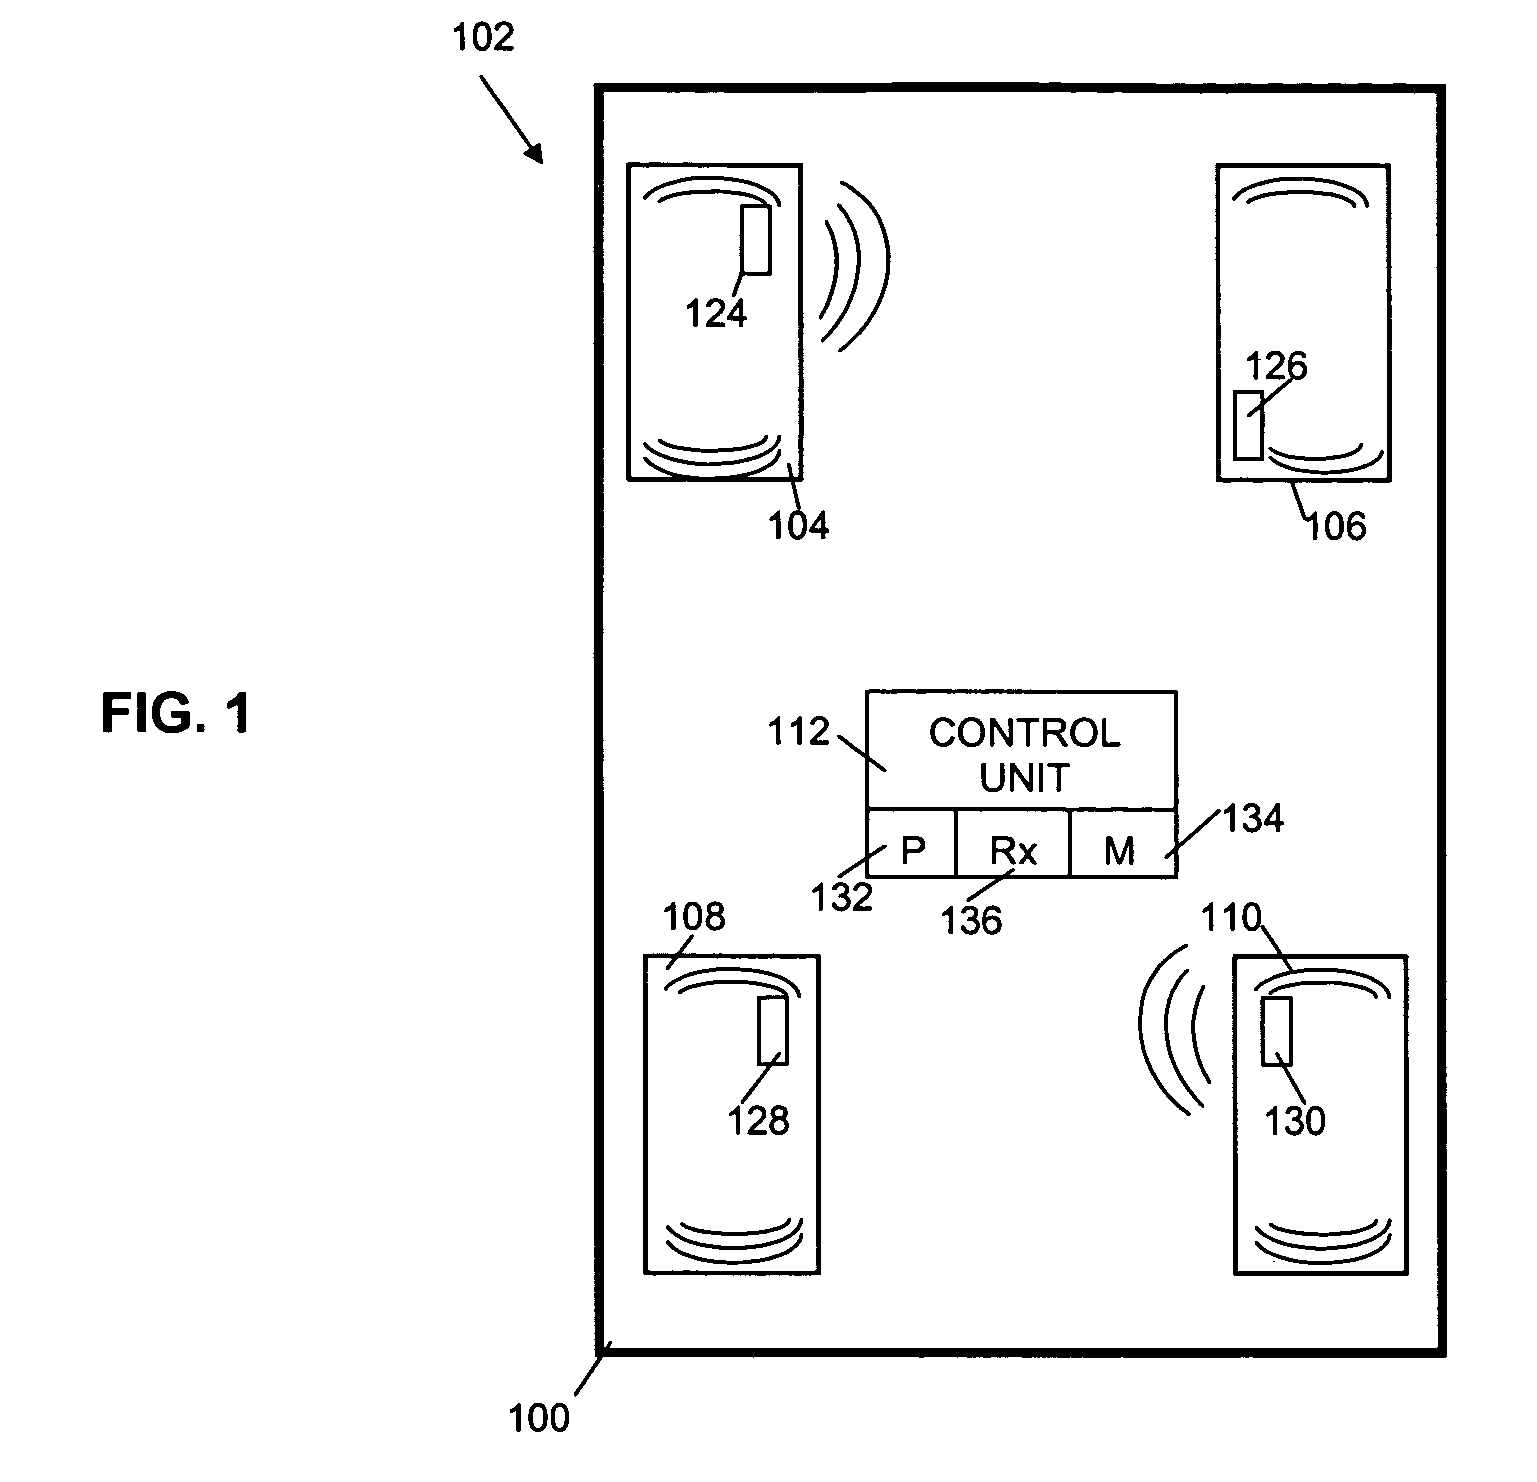 Motion detection using a shock sensor in a remote tire pressure monitoring system